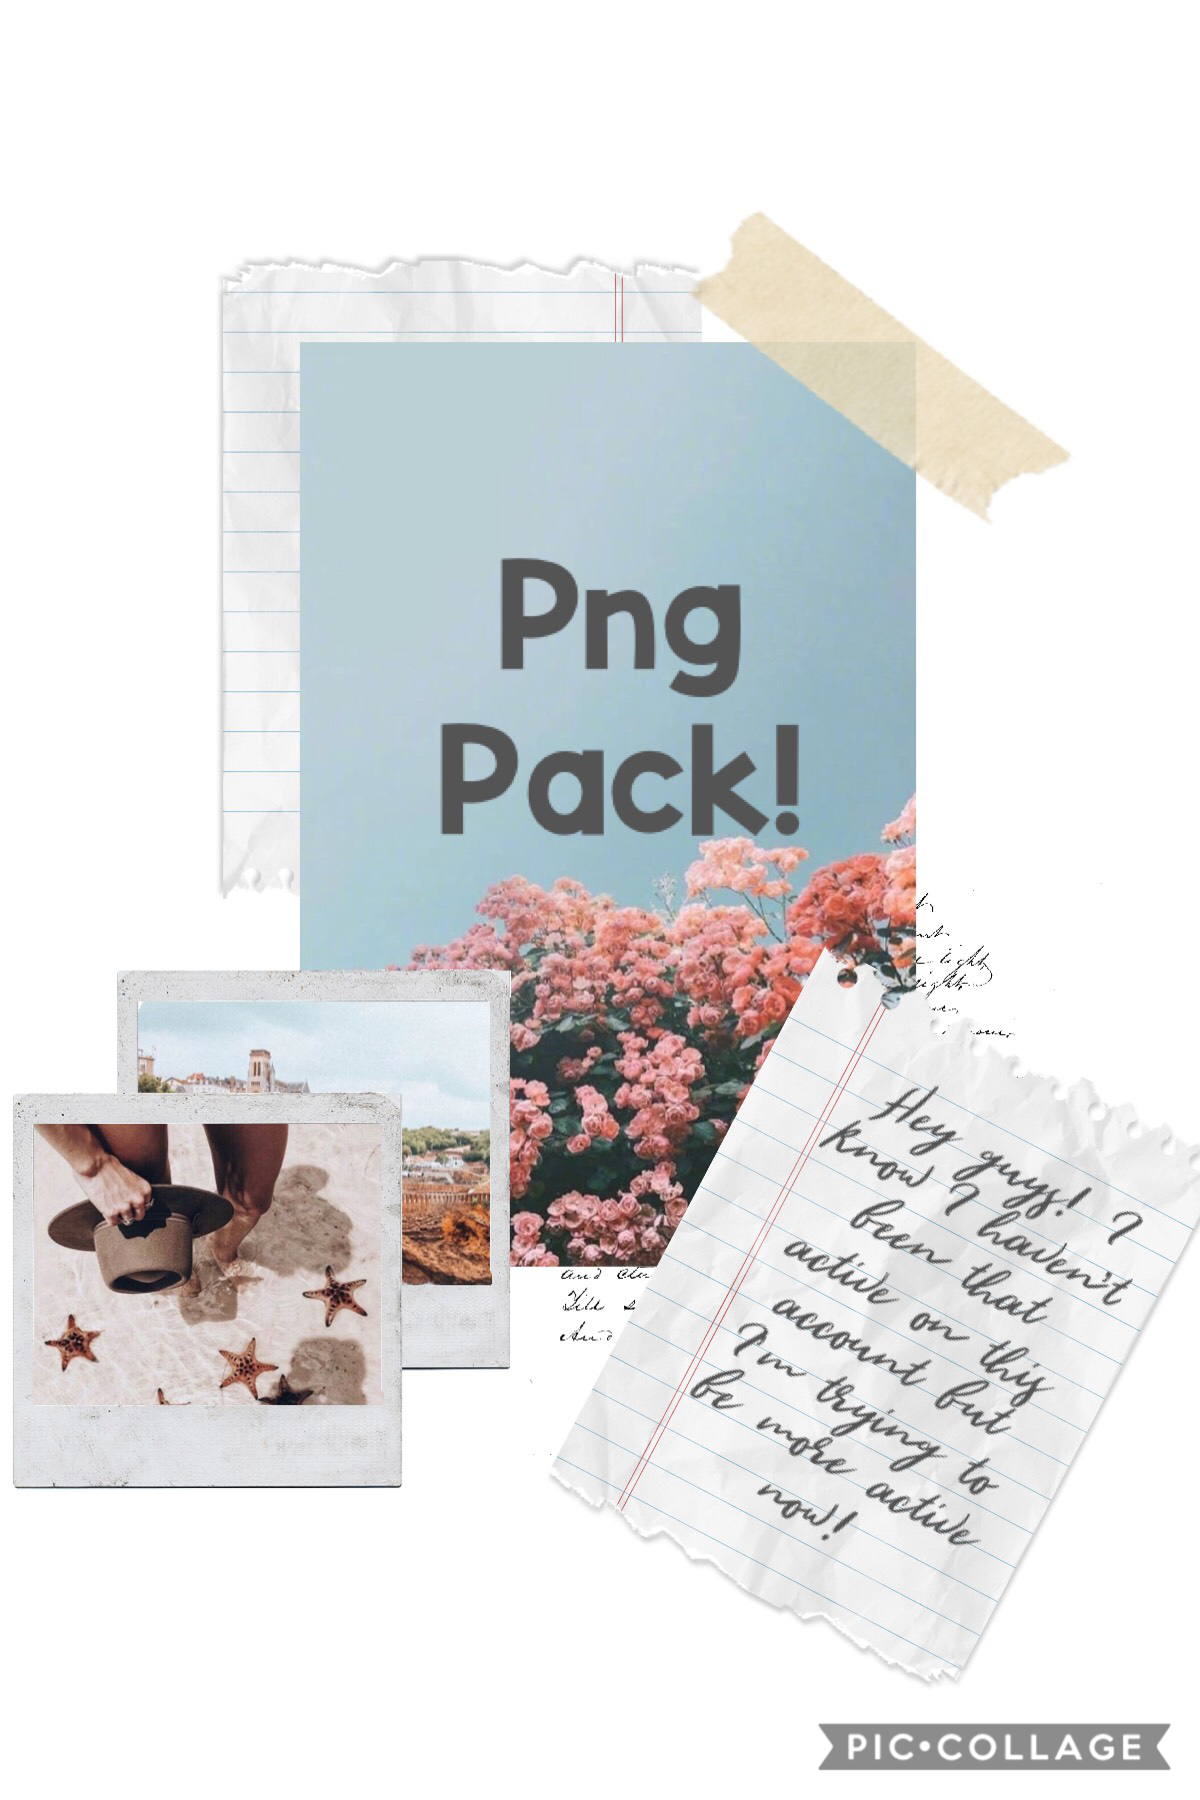 Png Pack!